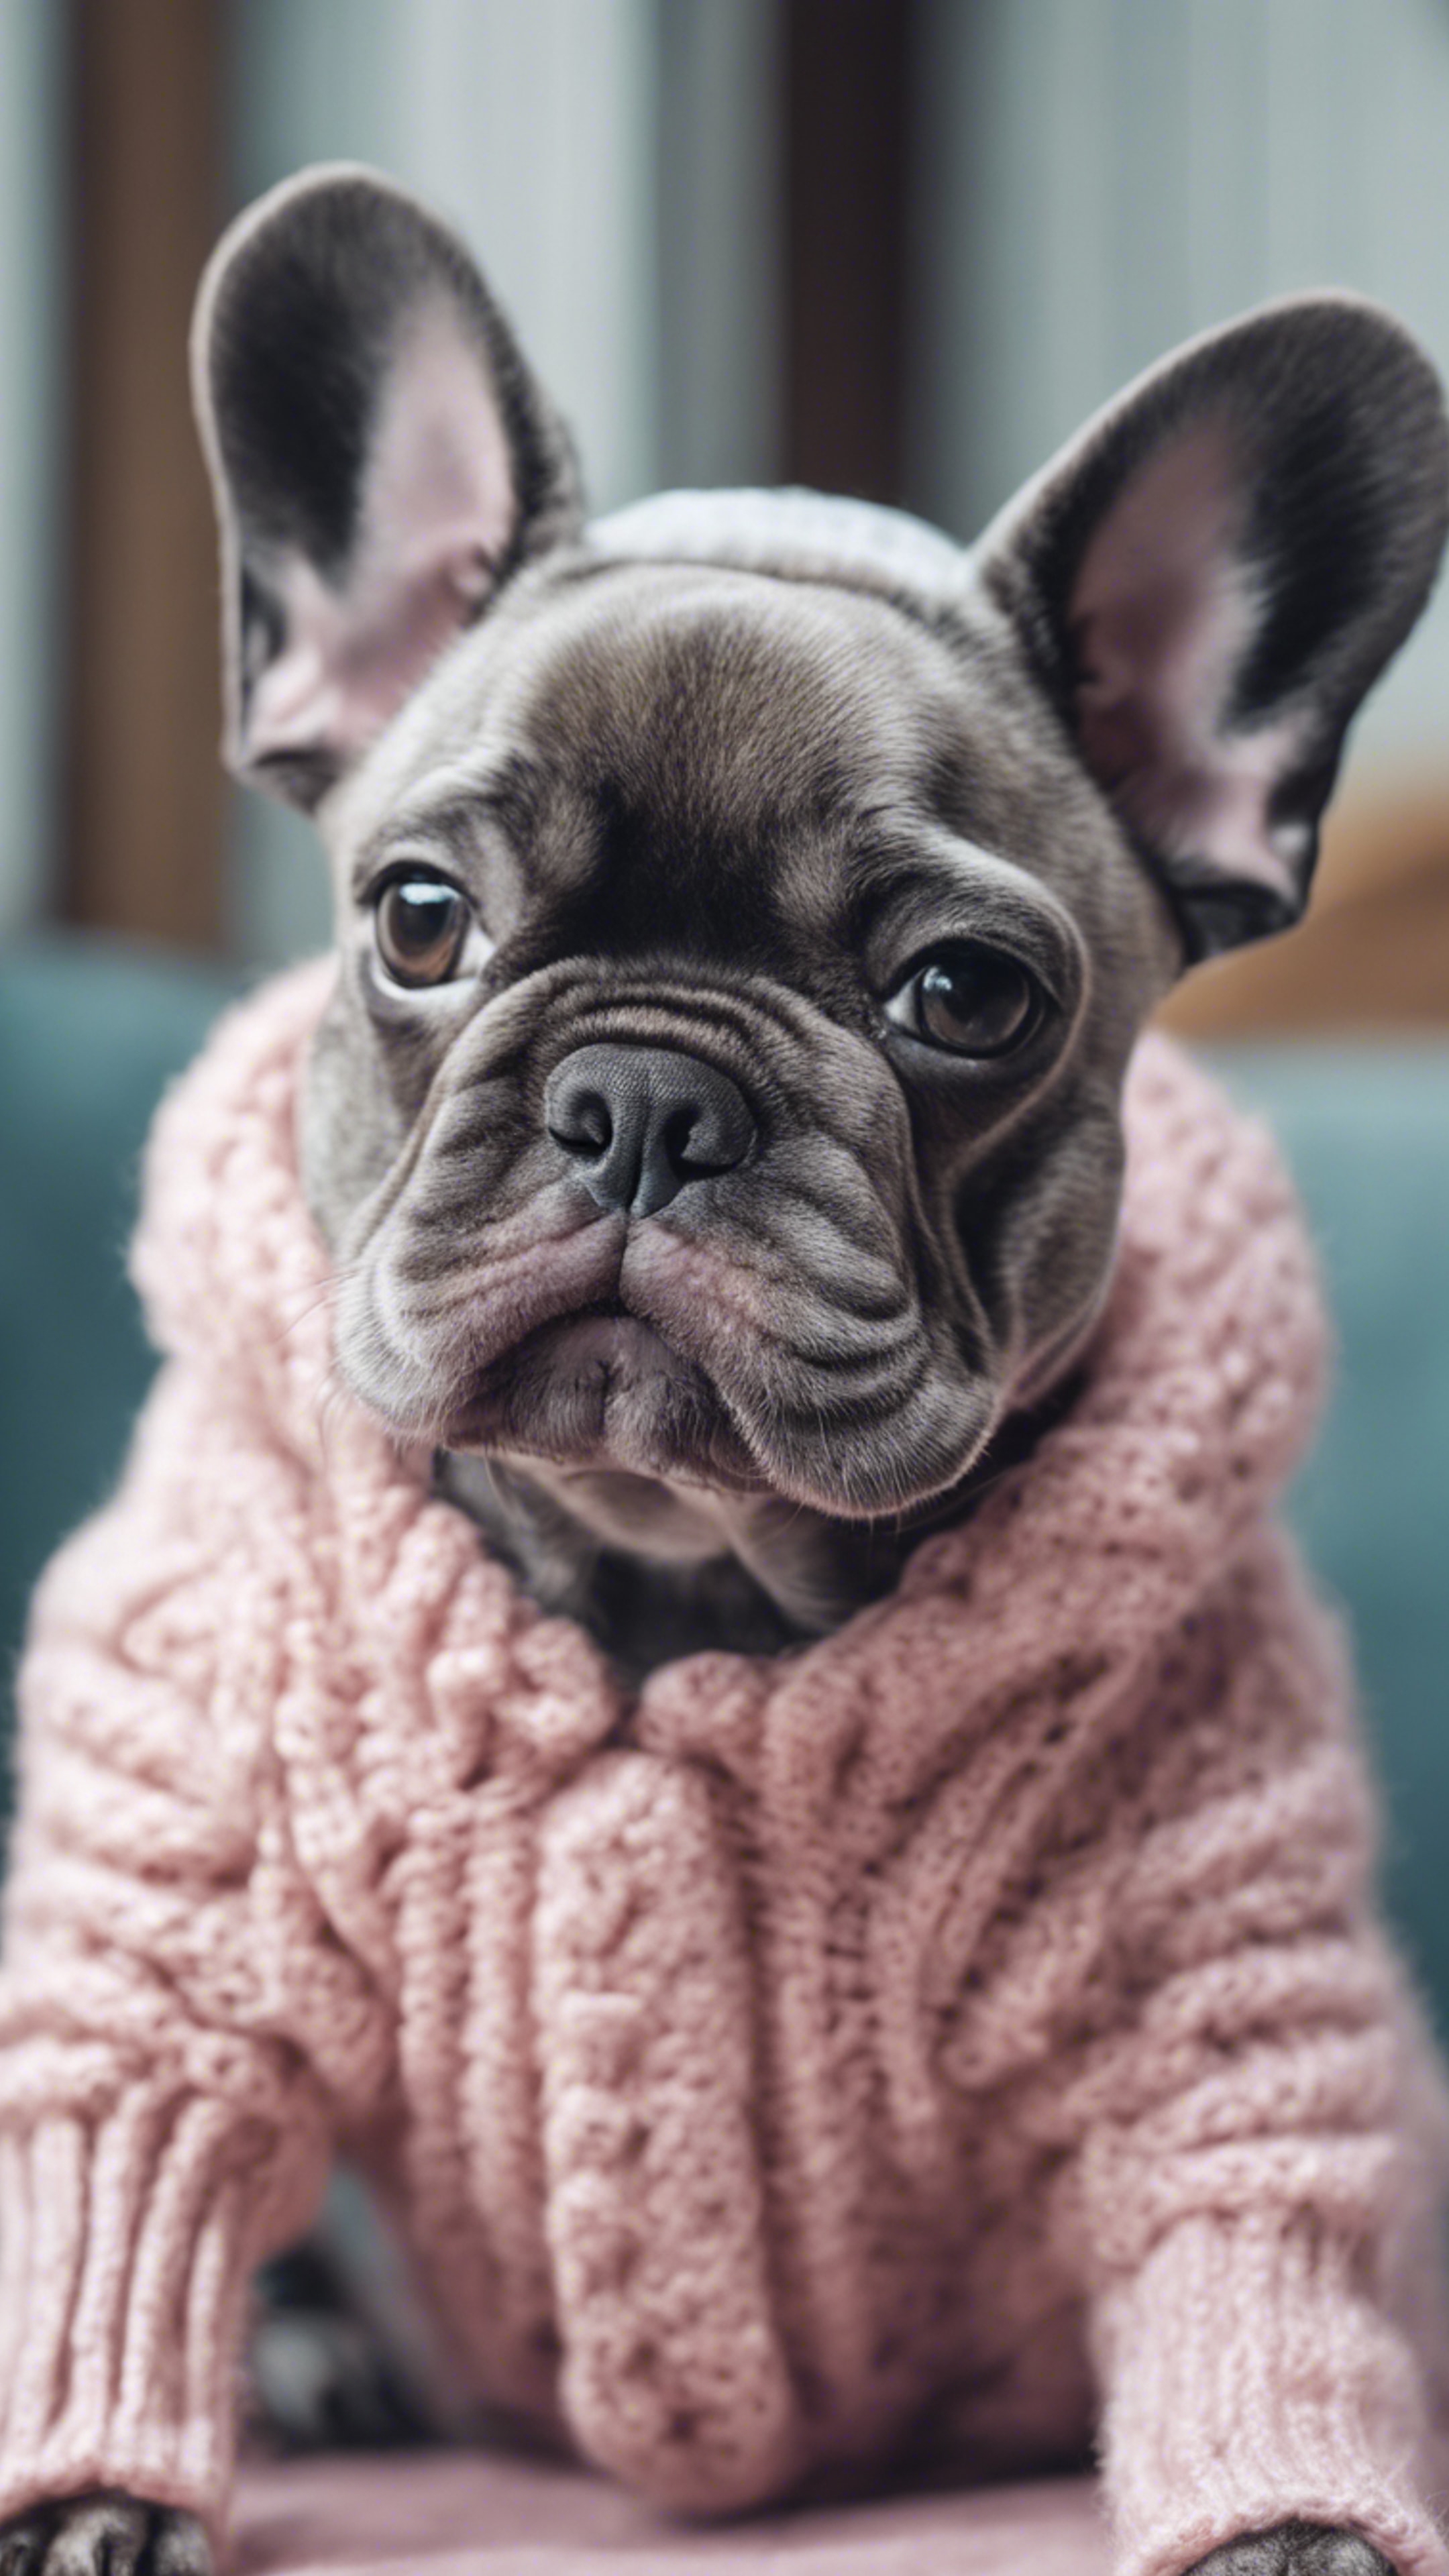 A cute French bulldog puppy wearing a pastel pink knitted sweater.壁紙[c6a029155d3f45b7833a]